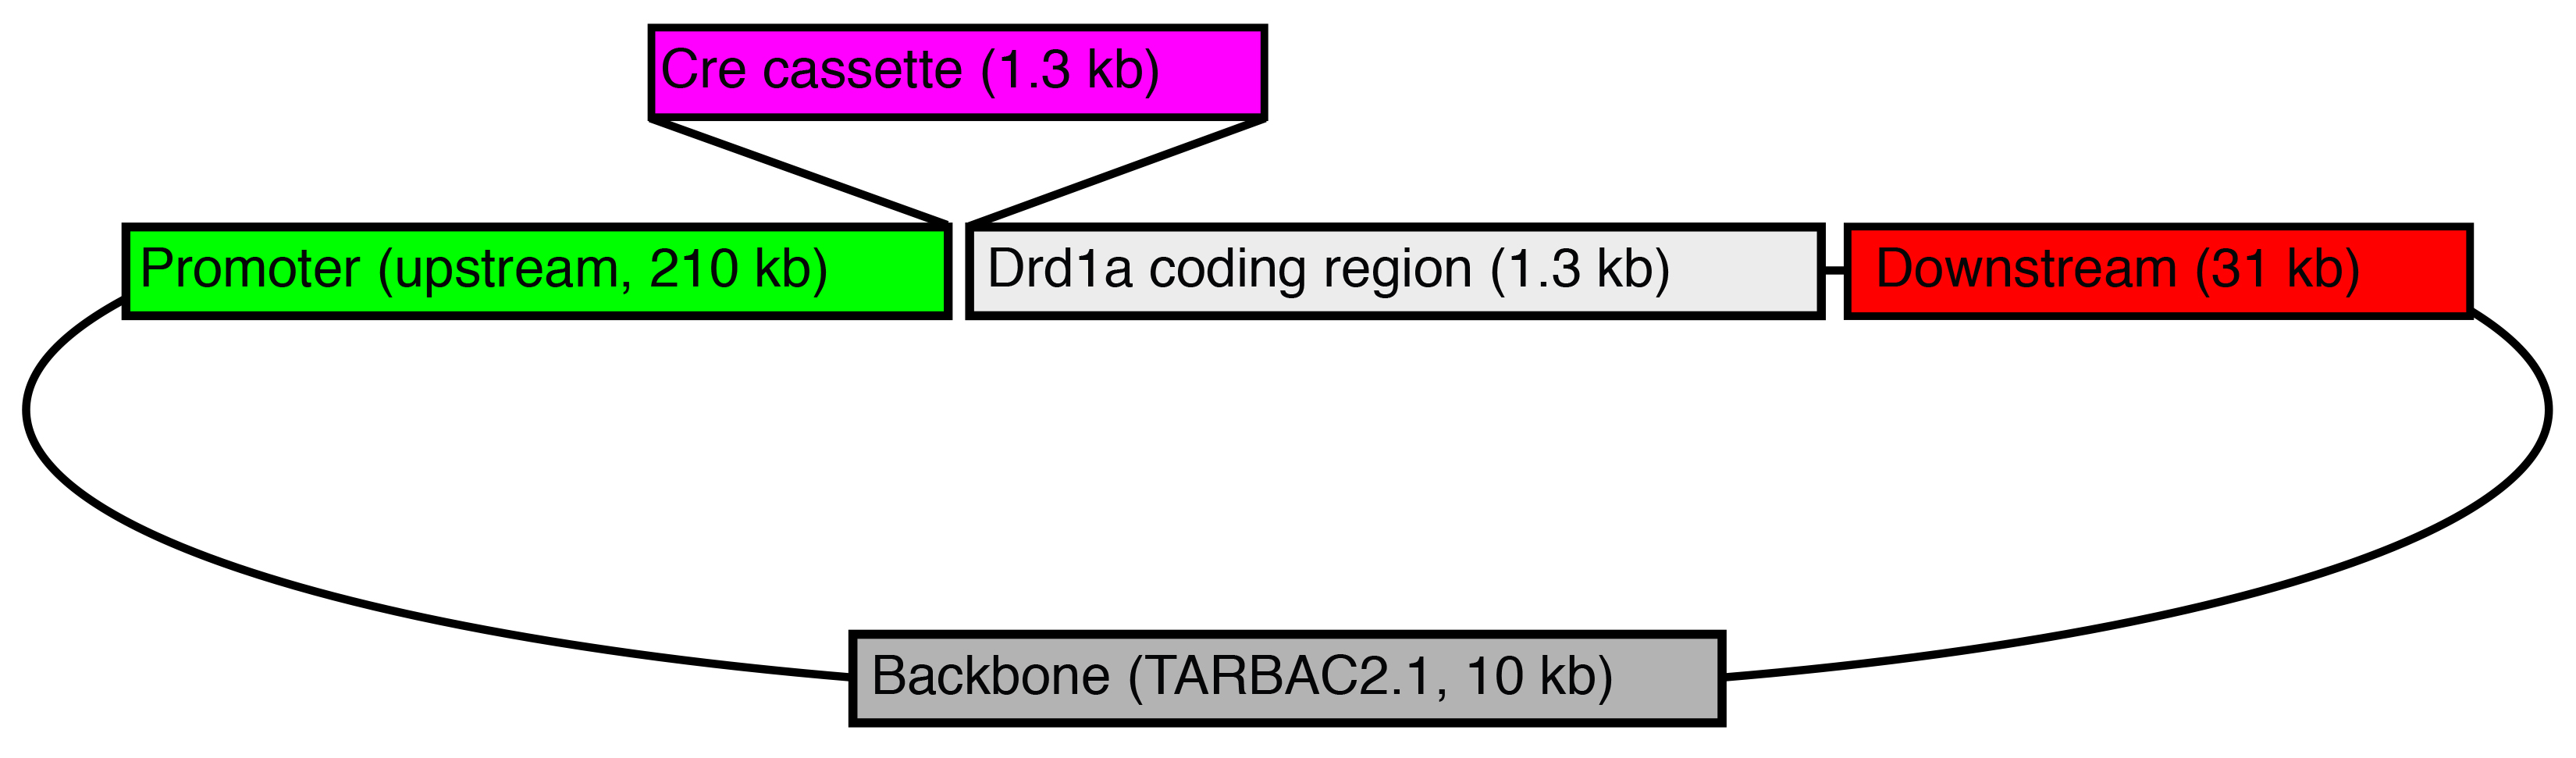 Schematic Draft Drd1a-iCre